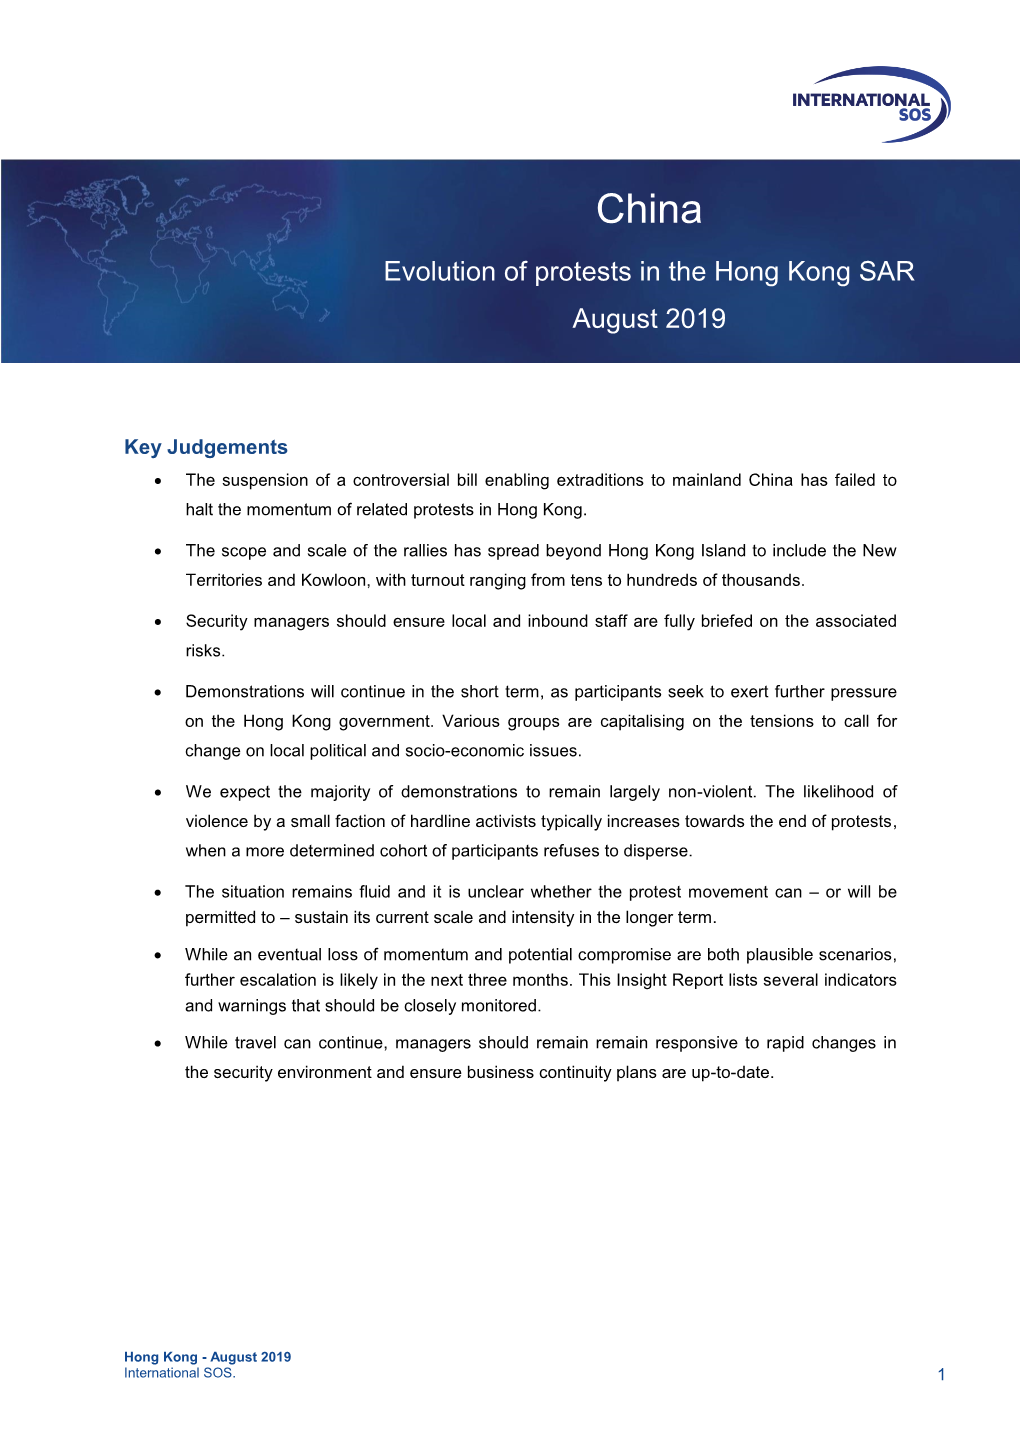 Evolution of Protests in the Hong Kong SAR August 2019